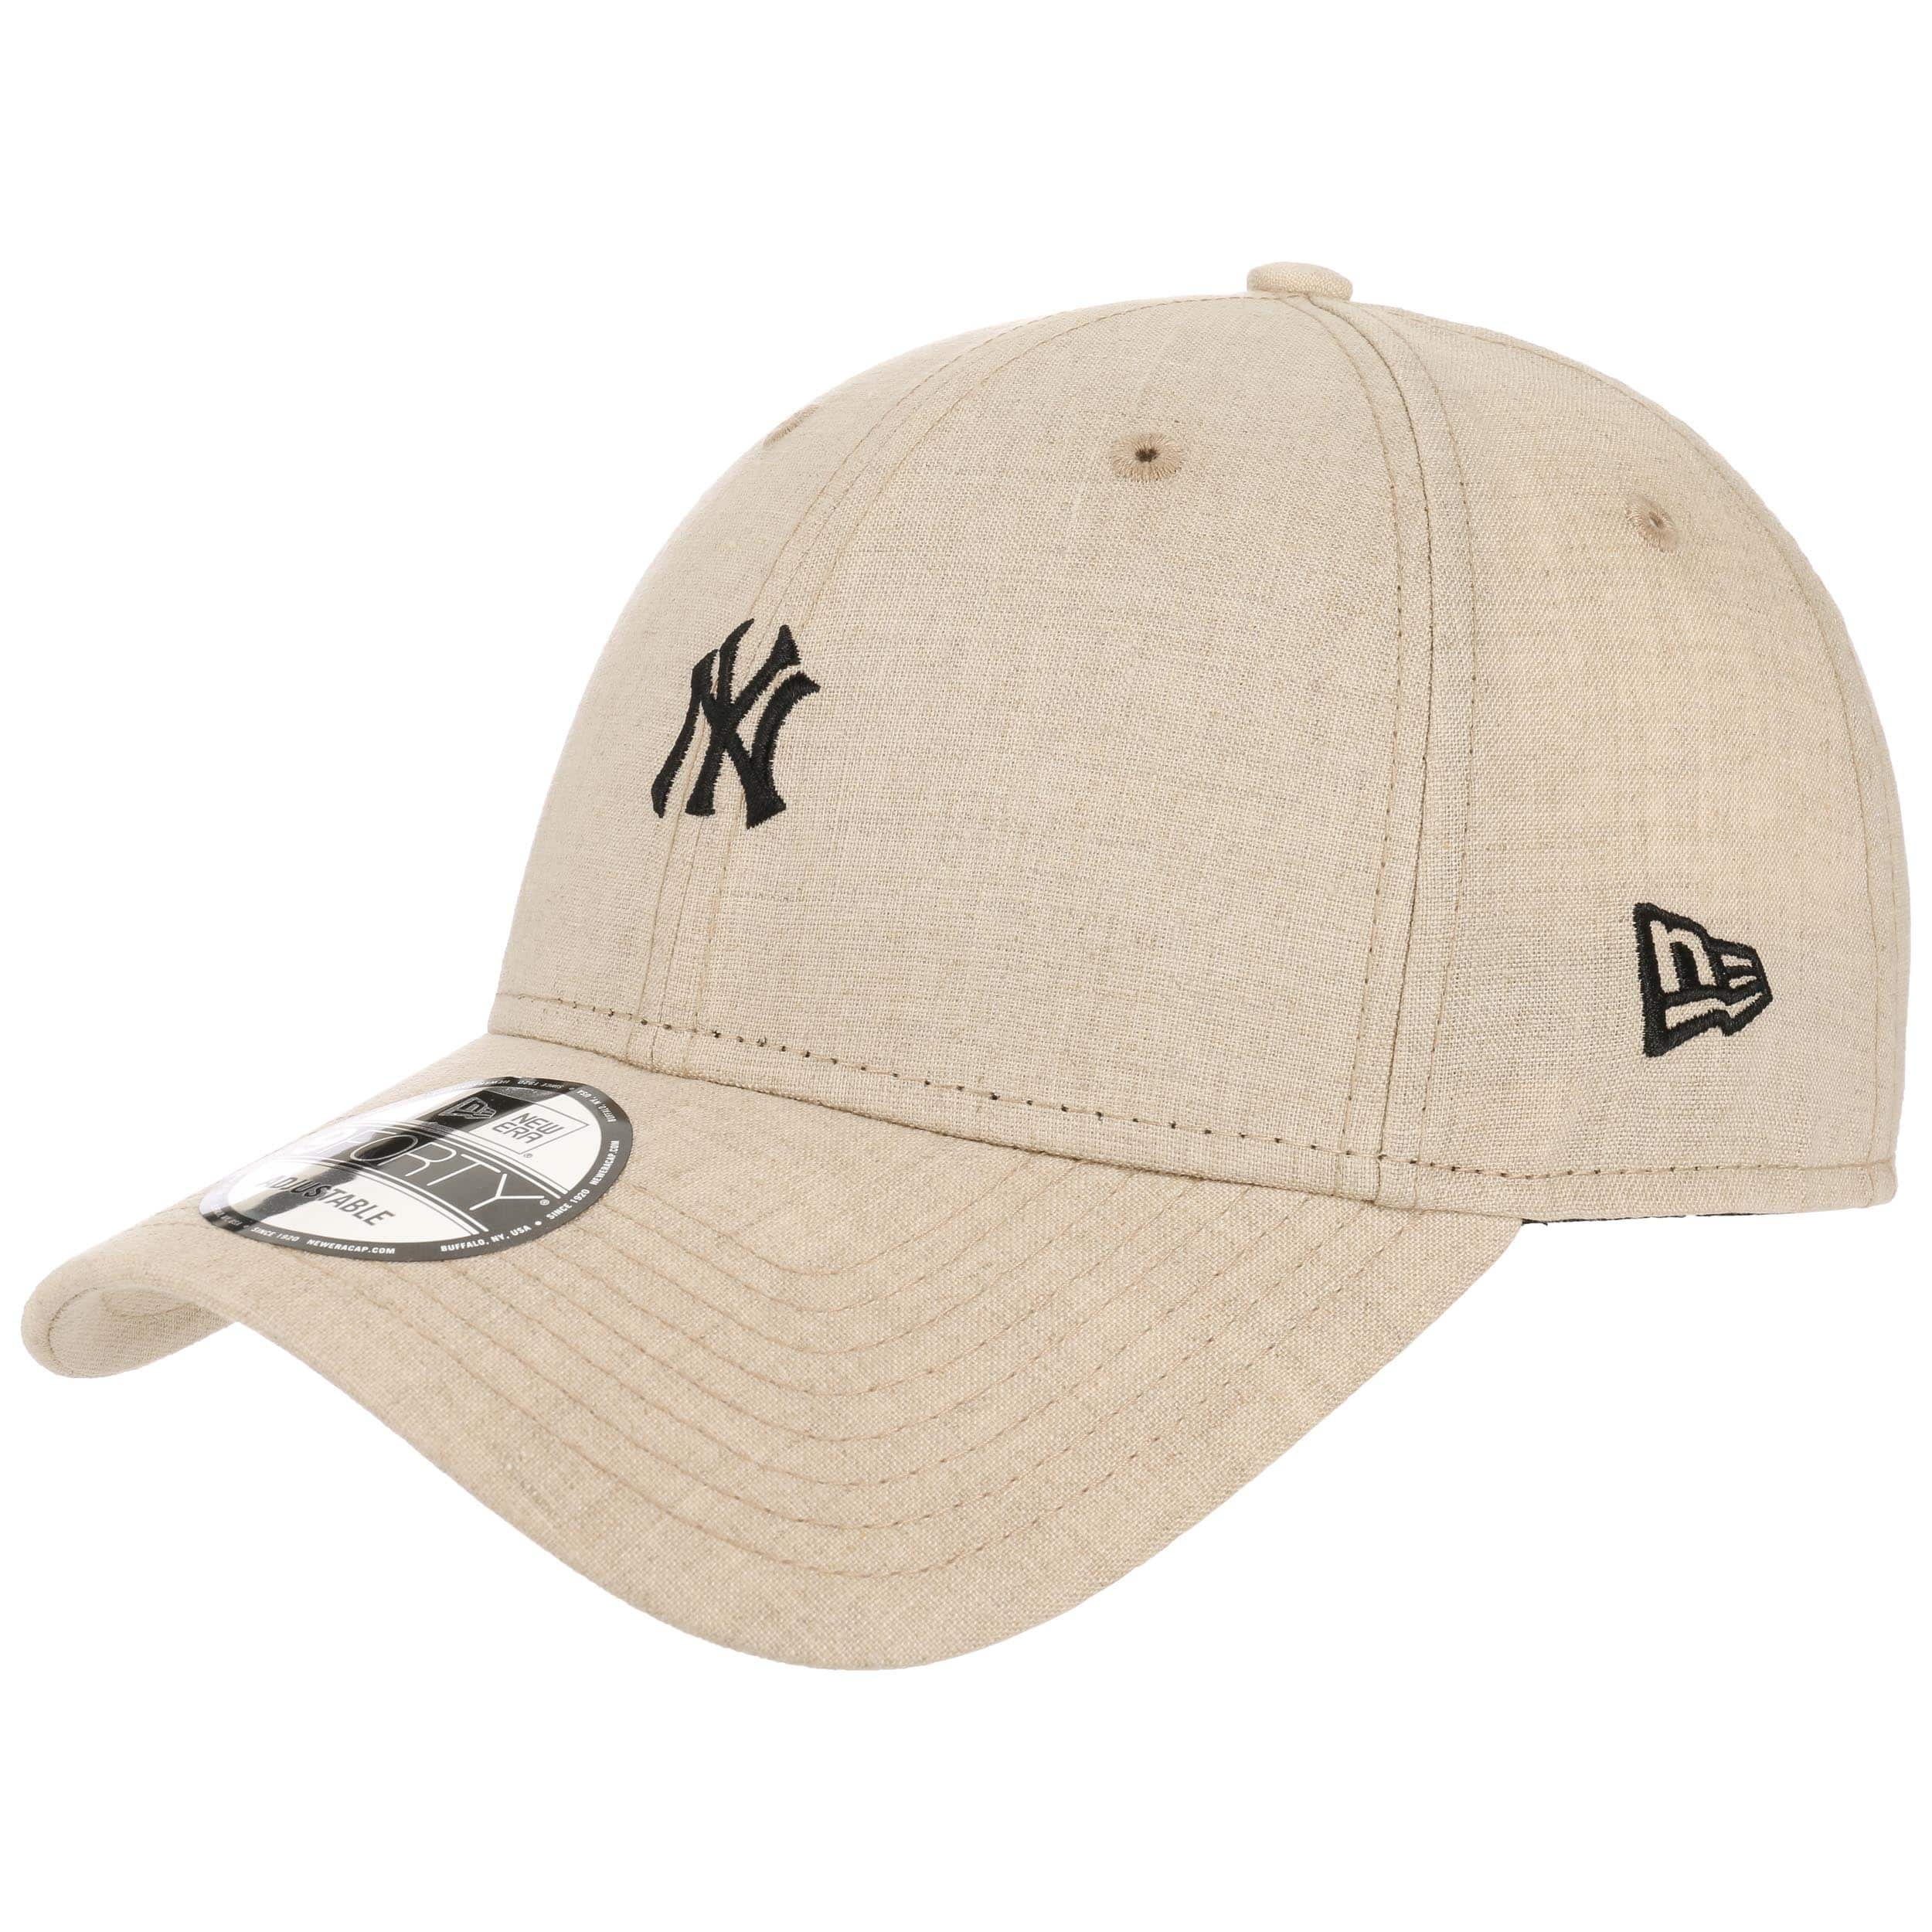 9Forty Small Logo Yankees Cap 29,95 € New - by Era